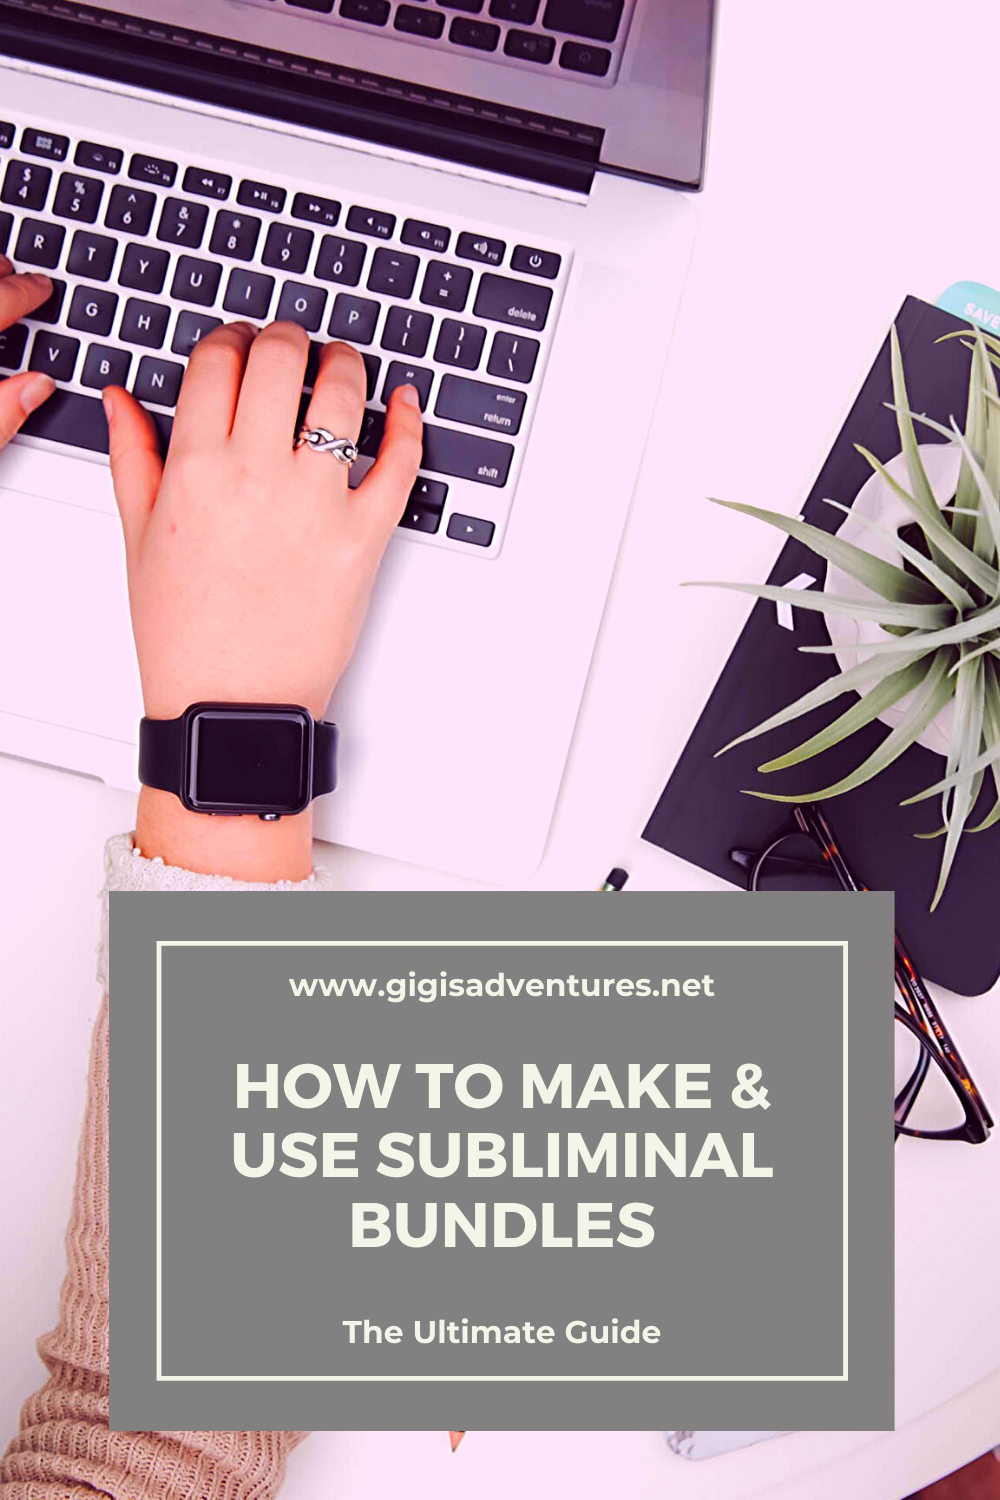 How To Make and Use Subliminal Bundles - The Ultimate Guide